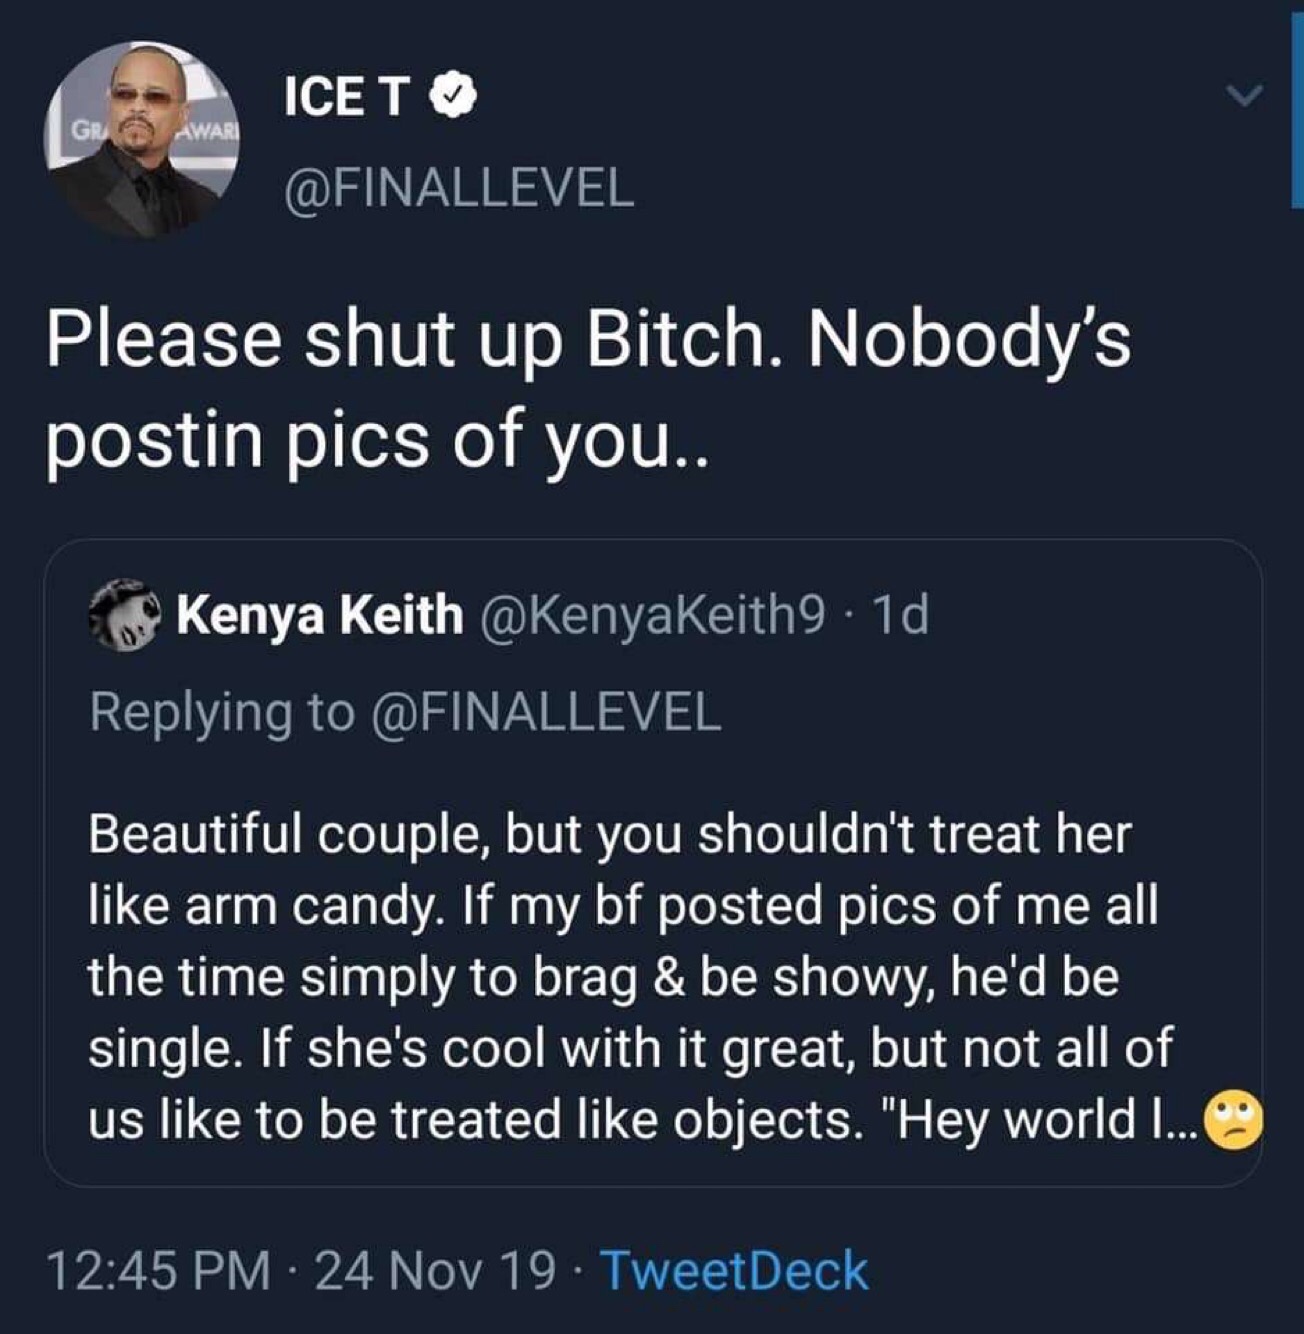 screenshot - Wari Ice T Please shut up Bitch. Nobody's postin pics of you.. Kenya Keith .1d Beautiful couple, but you shouldn't treat her arm candy. If my bf posted pics of me all the time simply to brag & be showy, he'd be single. If she's cool with it g